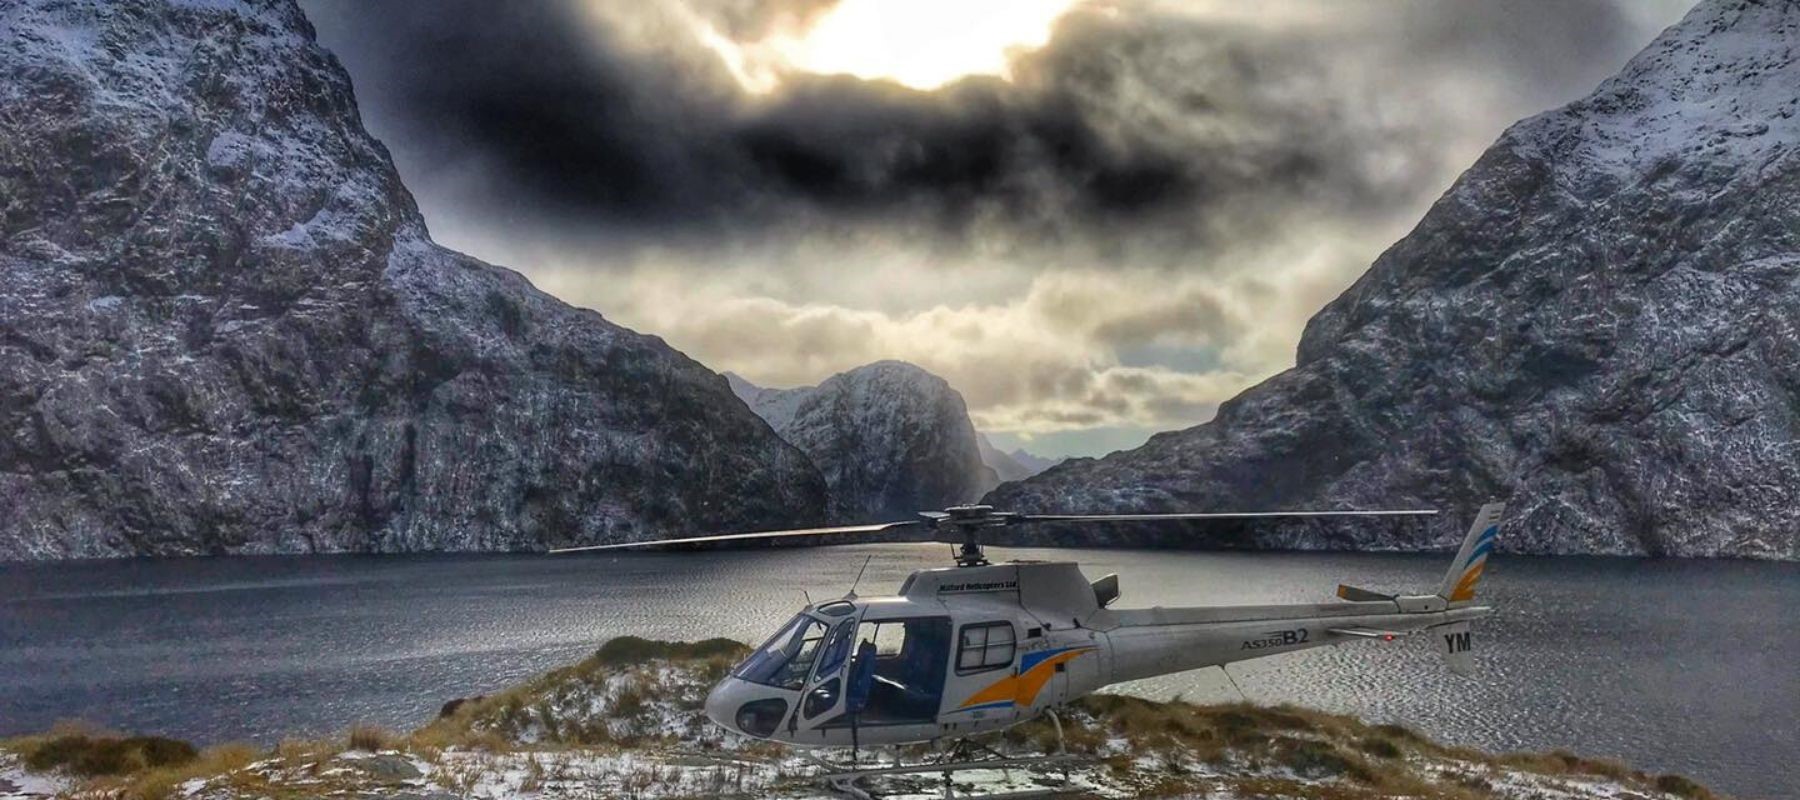 A helicopter sits on tussocks next Milford Sound from a scenic flight.